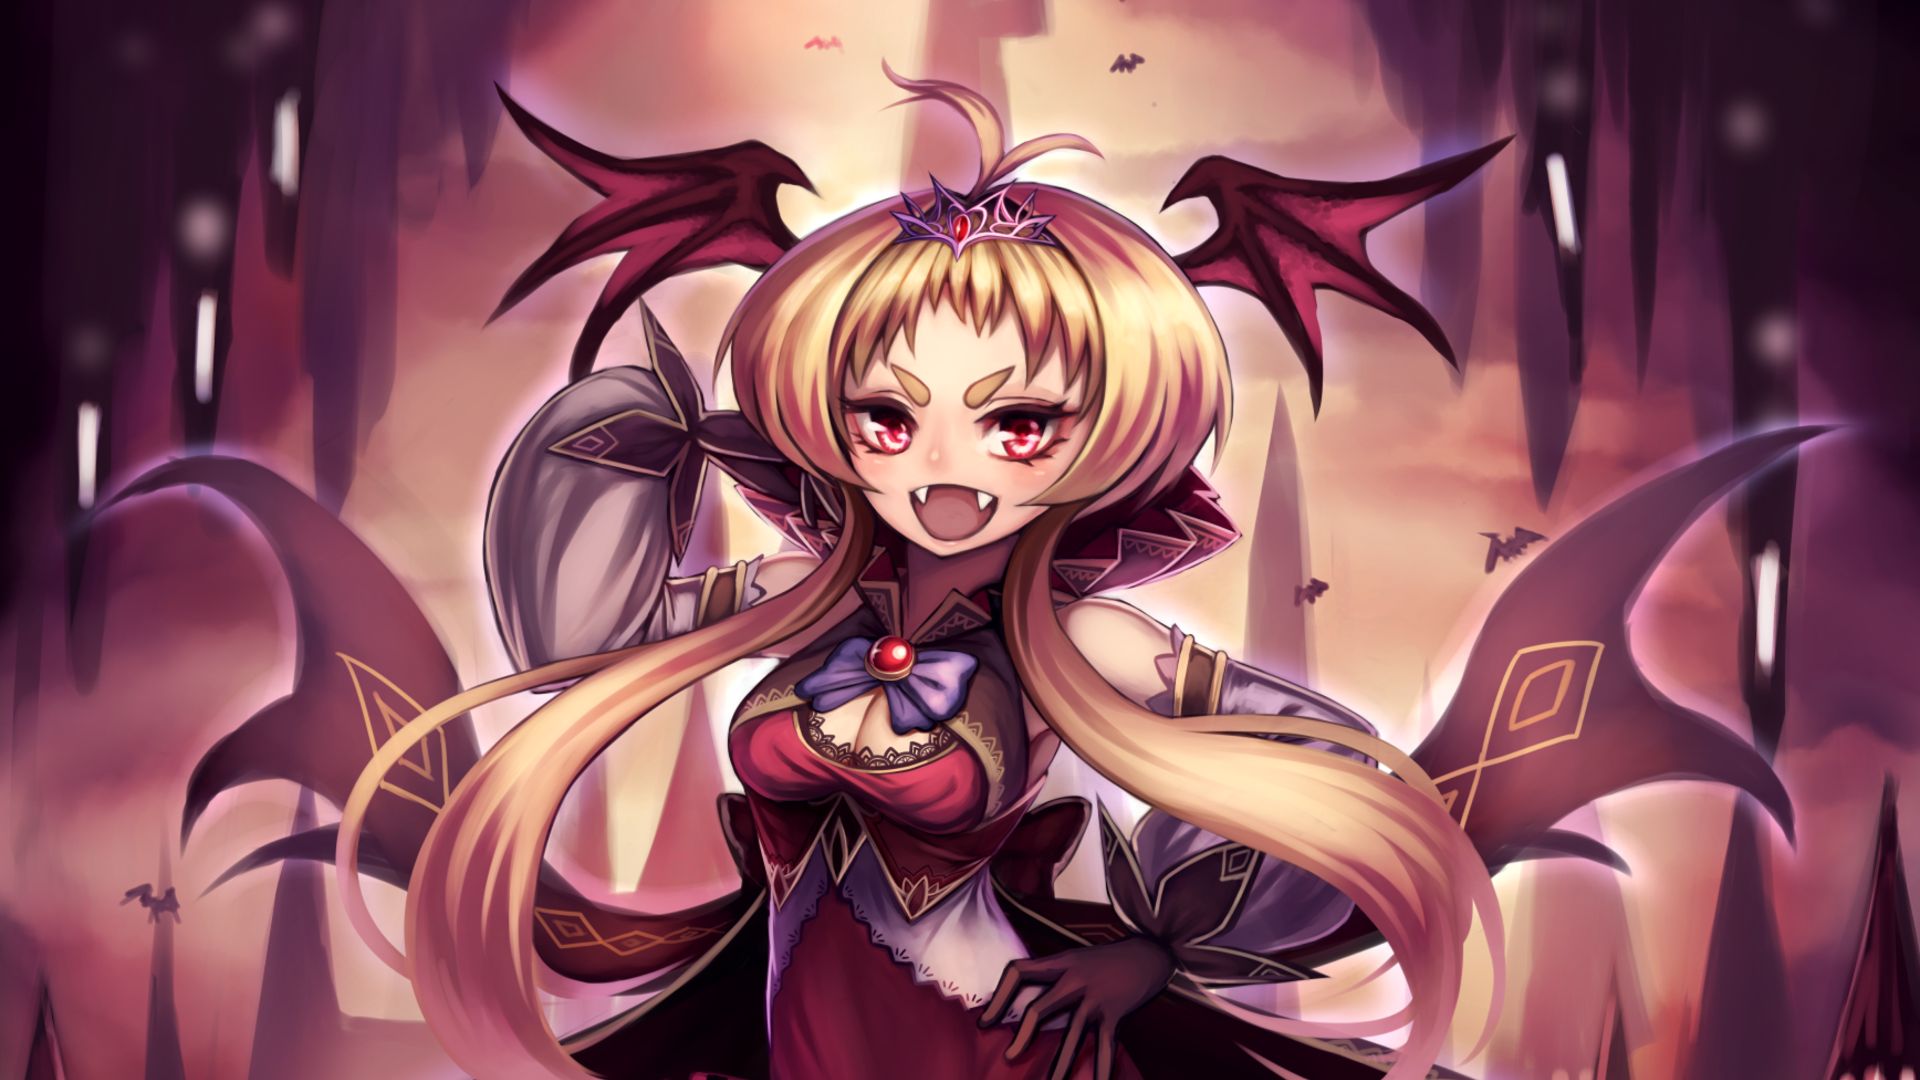 anime girl with cute demon wings Picture #122612060 | Blingee.com